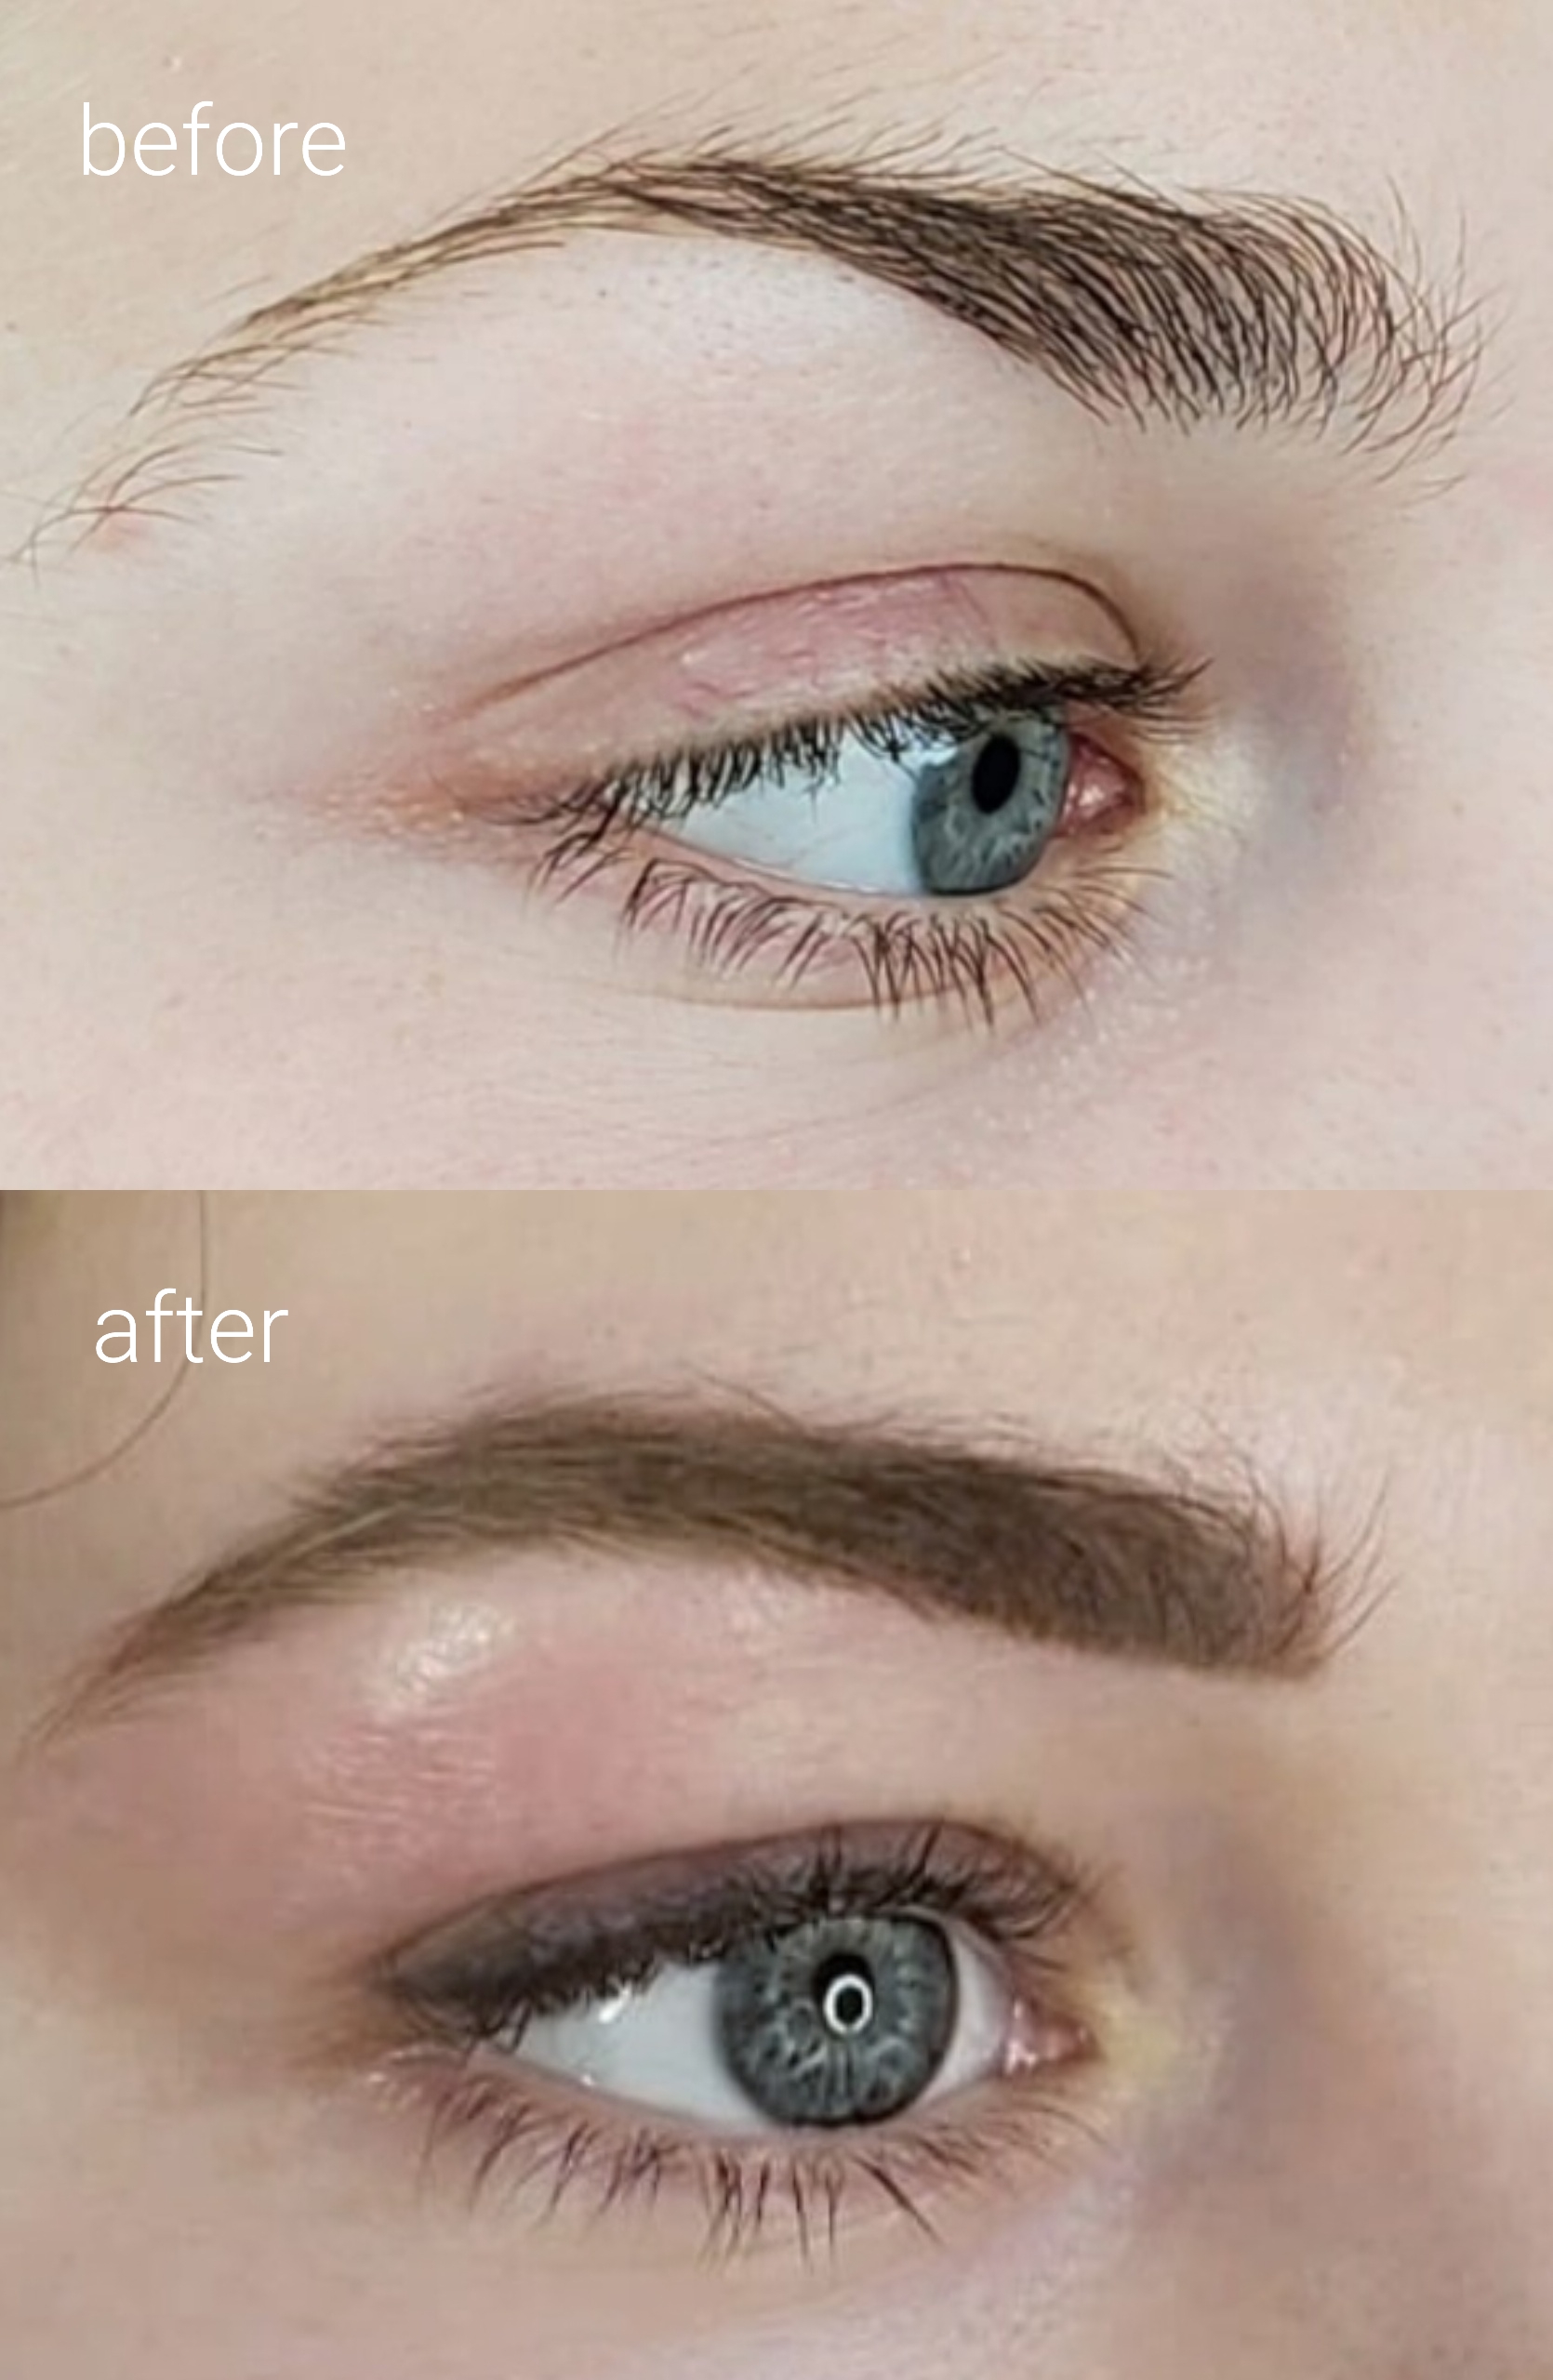 Powder brows and healed soft eyeliner